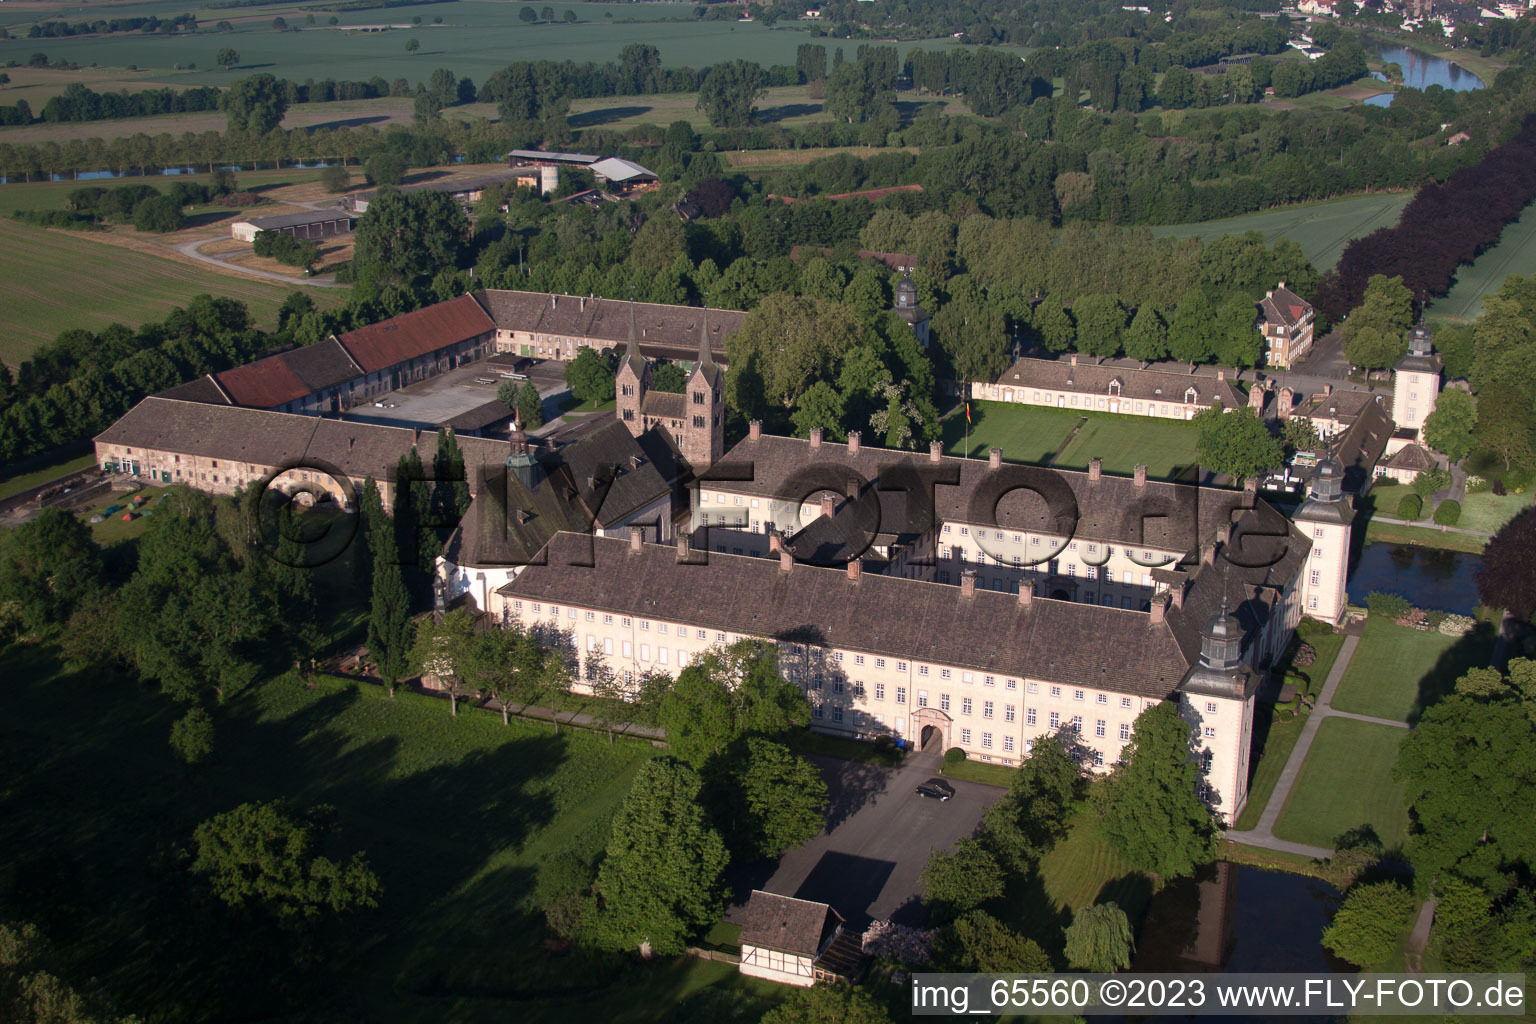 Corvey Castle in Höxter in the state North Rhine-Westphalia, Germany seen from above